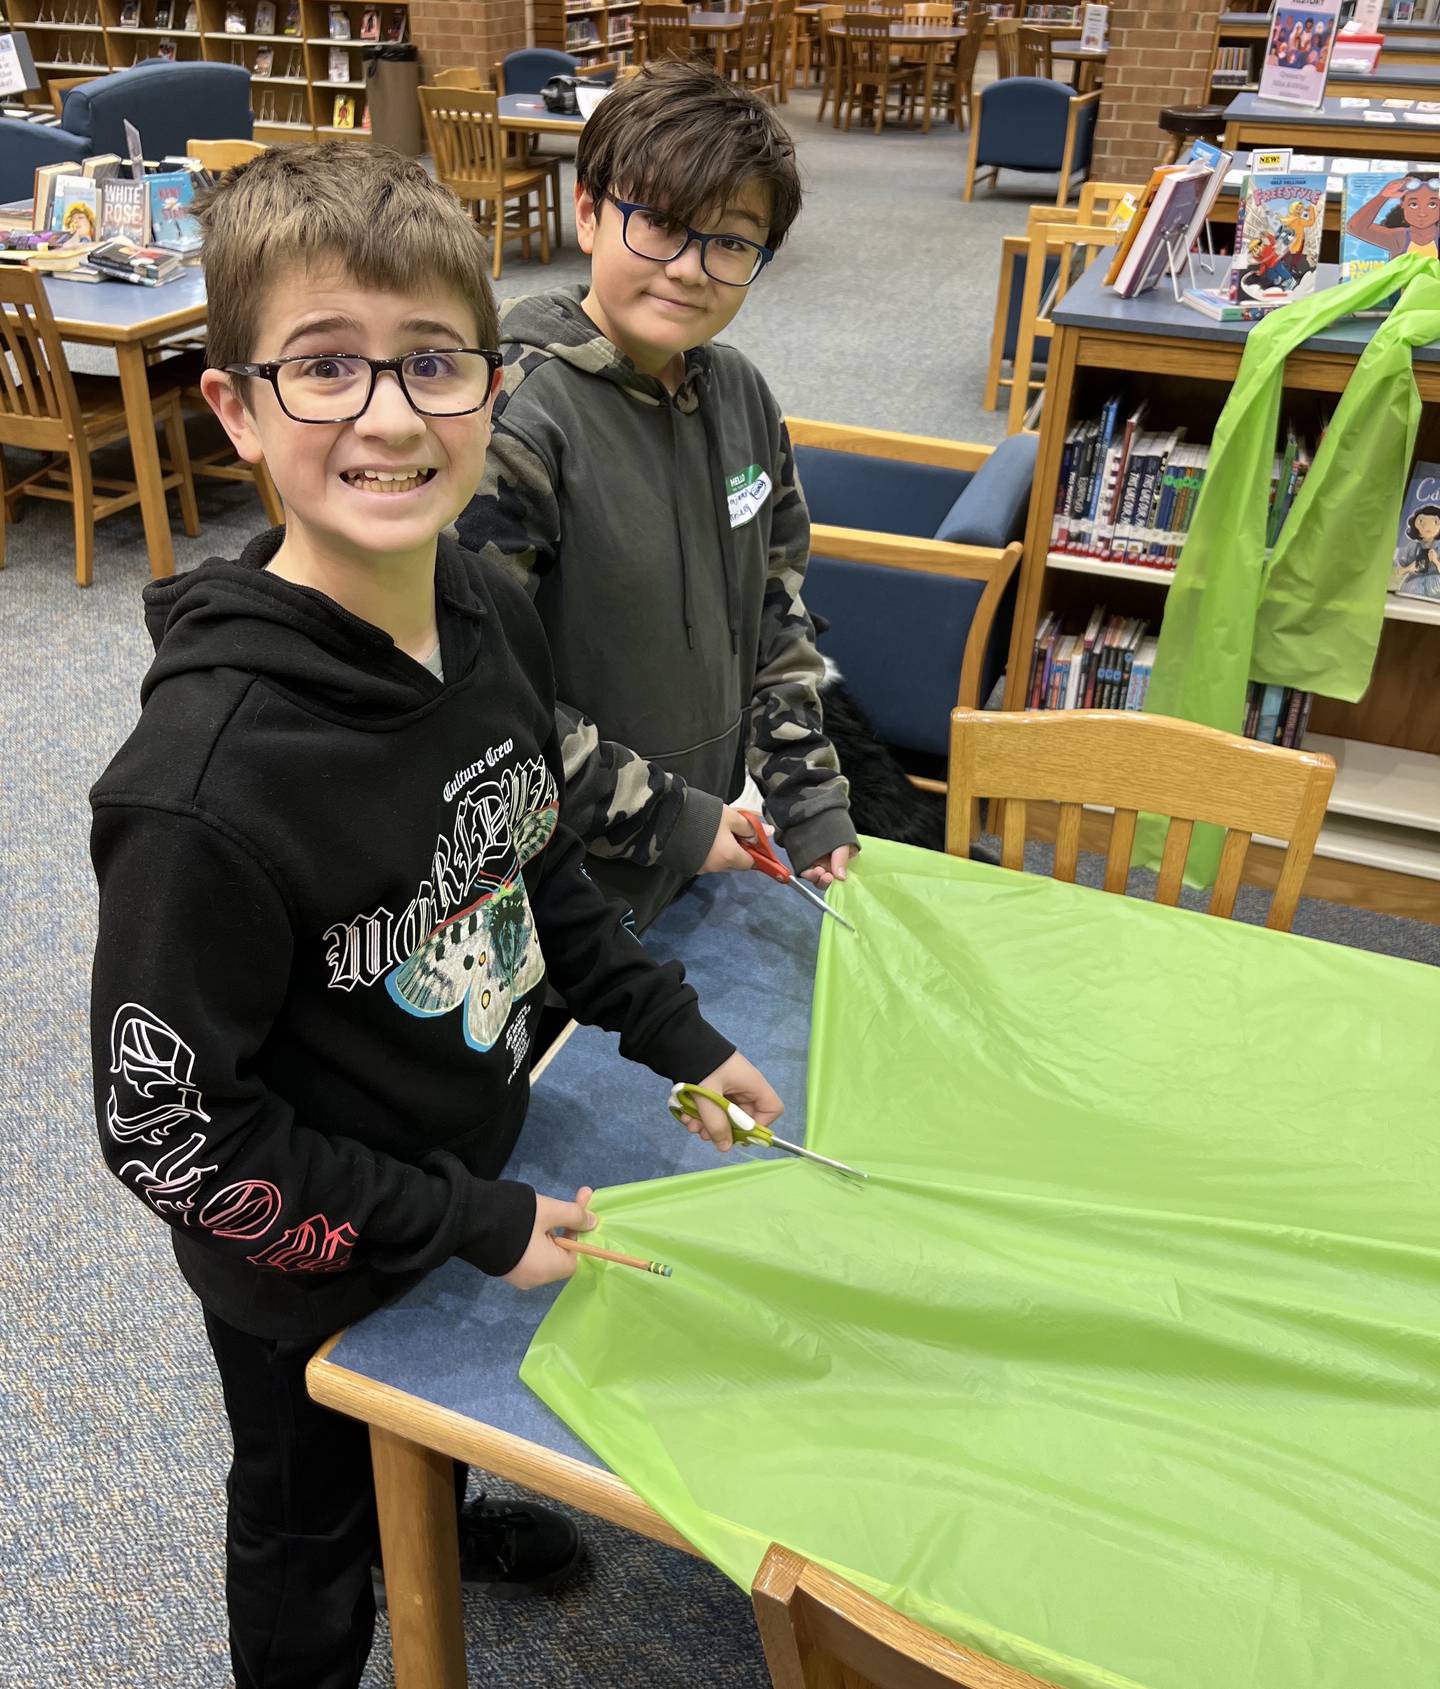 Andrew Kournetas (left) and Ben Krieg cut bright green plastic sheeting into strips so they can be tied as ribbons in Geneva to promote May as Mental Health Awareness Month.